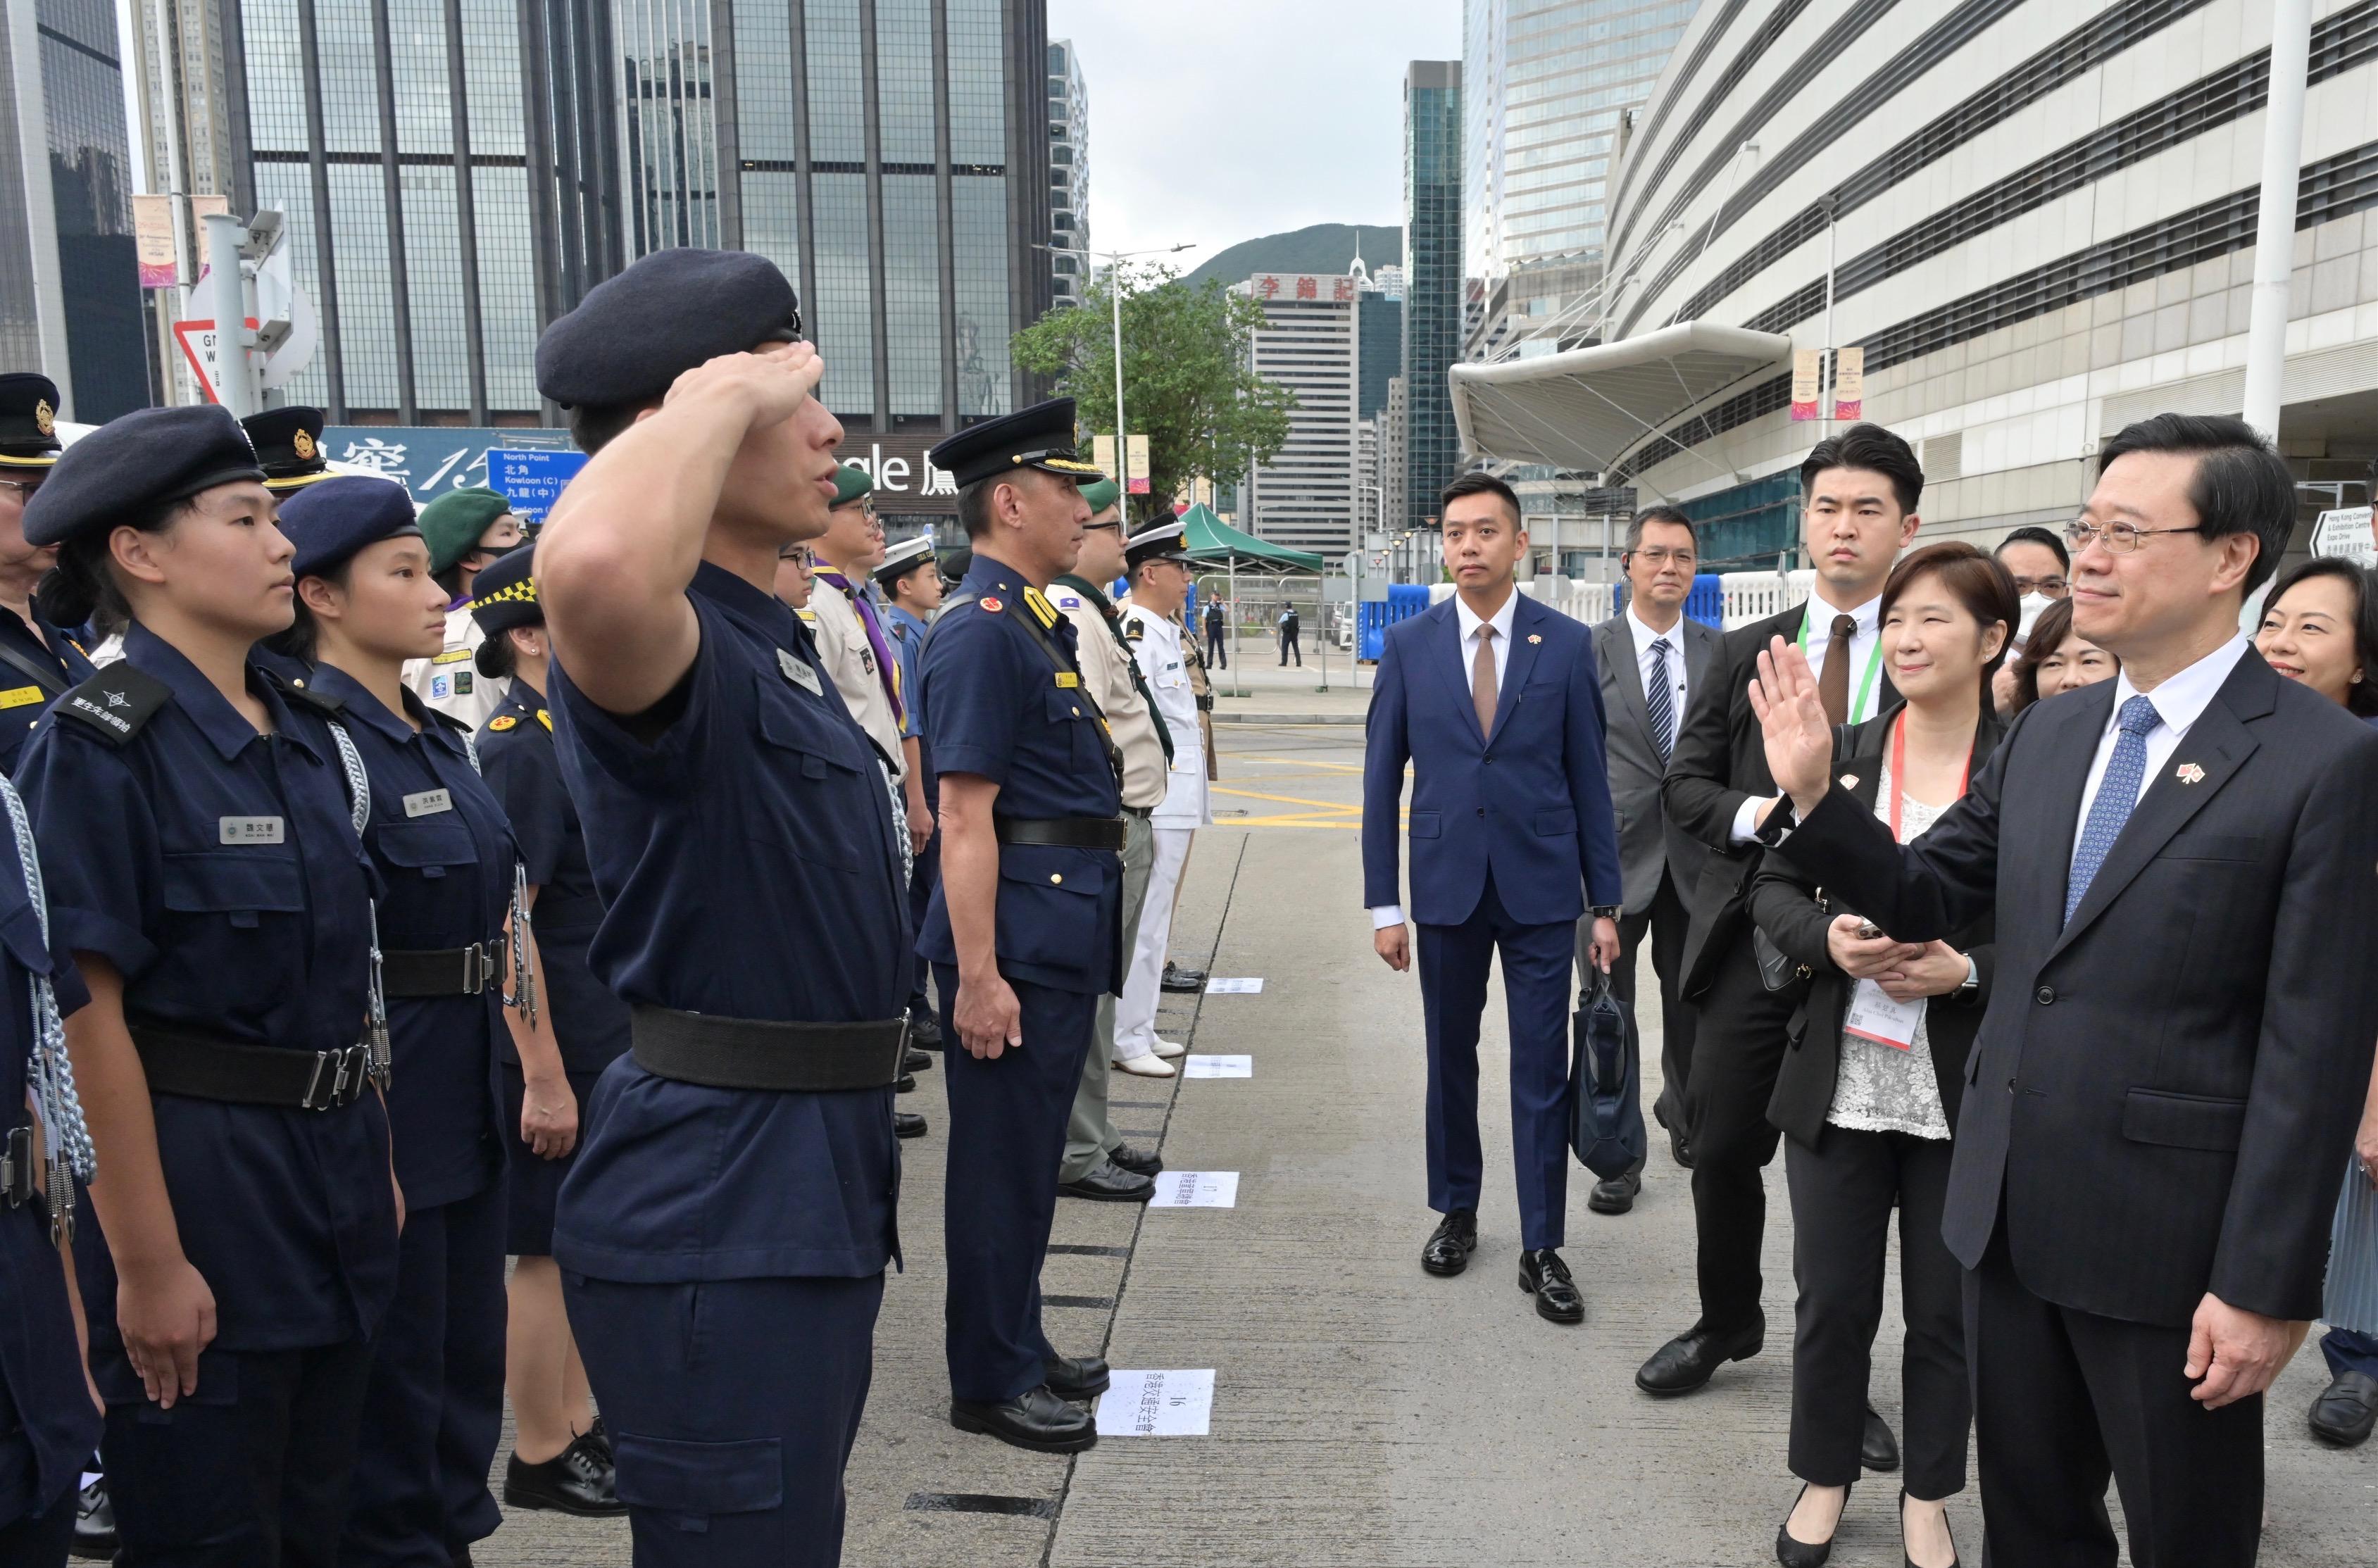 The Chief Executive, Mr John Lee, together with Principal Officials and guests, attends the flag-raising ceremony for the 26th anniversary of the establishment of the Hong Kong Special Administrative Region at Golden Bauhinia Square in Wan Chai this morning (July 1). Photo shows Mr Lee (first right) receiving salute by uniformed groups.